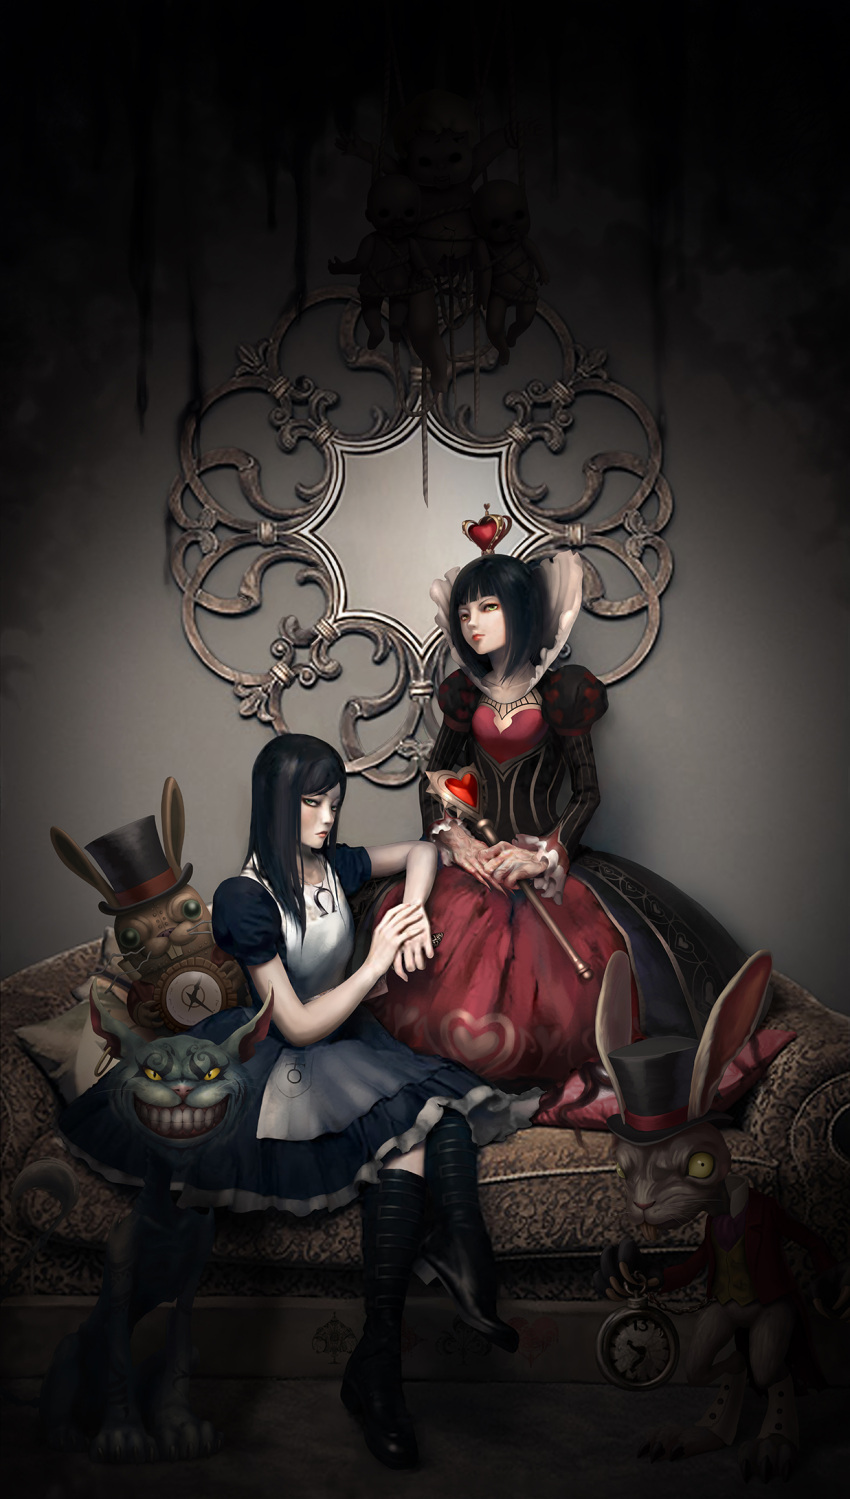 2girls alice:_madness_returns alice_(alice_in_wonderland) american_mcgee's_alice bangs black_hair blunt_bangs boots cheshire_cat_(alice_in_wonderland) crown green_eyes hat highres holding holding_knife knife long_hair long_sleeves looking_at_viewer mini_crown multiple_girls nyarko parted_bangs pocket_watch puffy_long_sleeves puffy_short_sleeves puffy_sleeves queen_of_hearts_(alice_in_wonderland) scepter short_hair short_sleeves sitting top_hat watch white_rabbit_(alice_in_wonderland) yellow_eyes